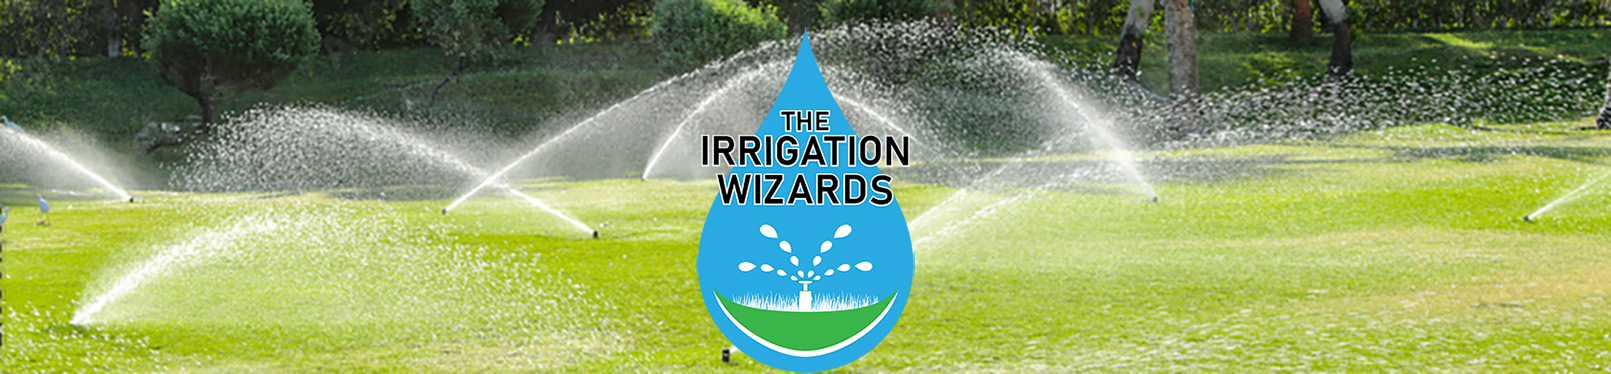 The Irrigation Wizards Logo